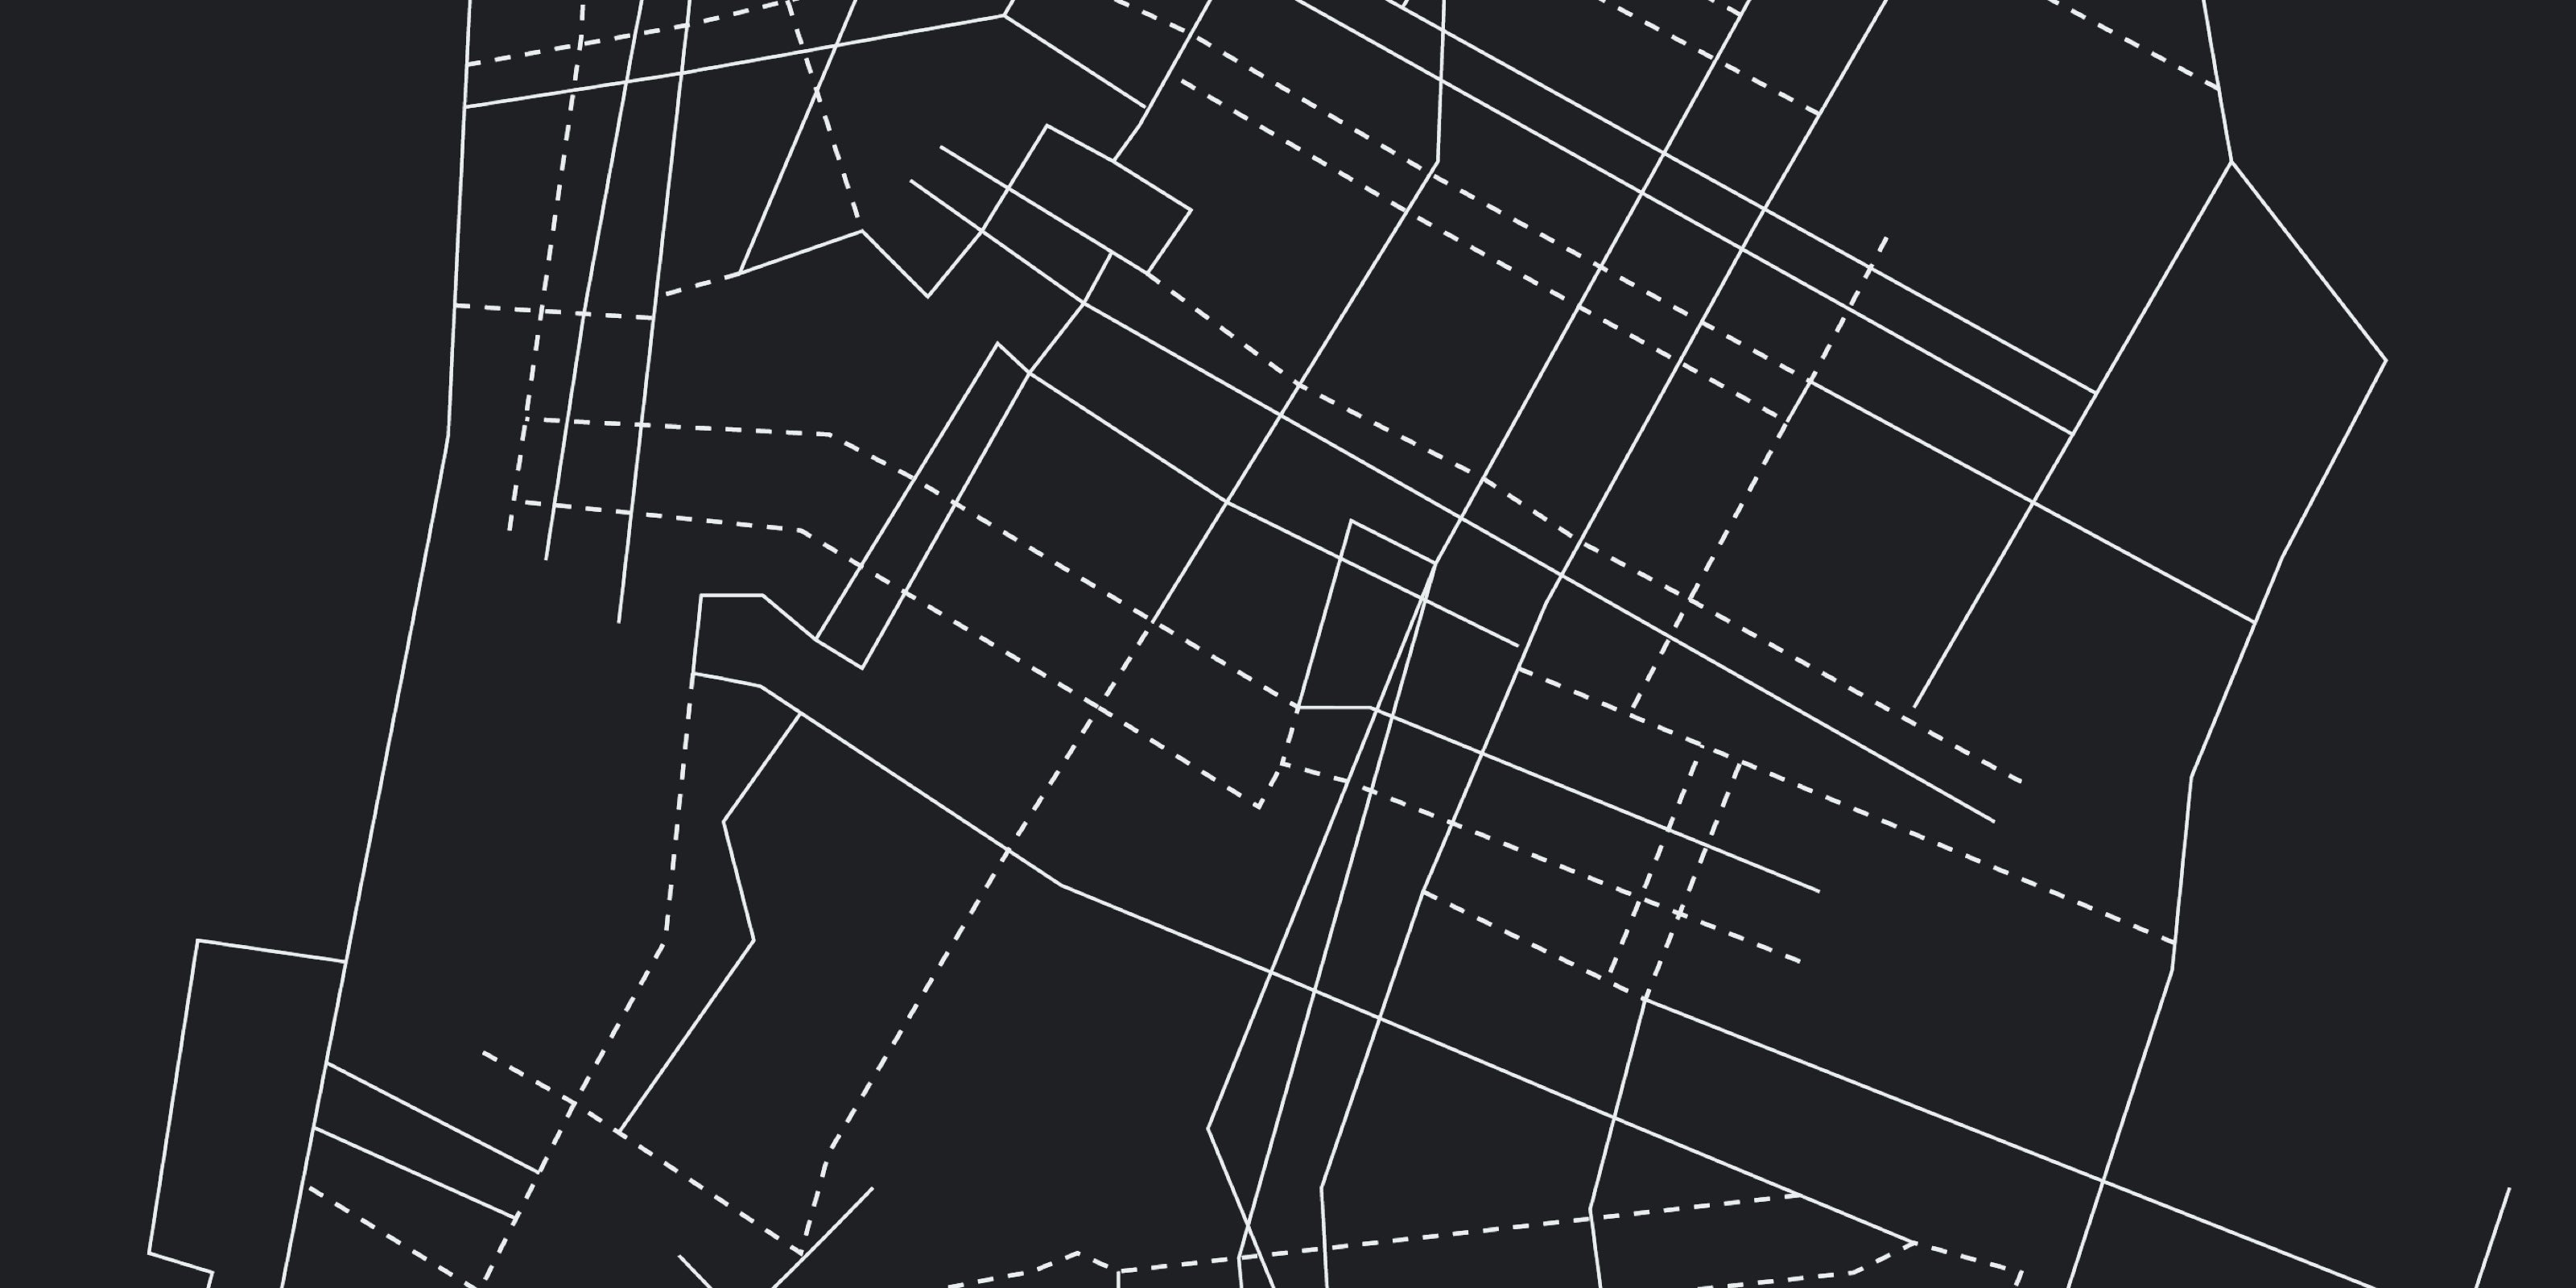 A graphic pattern of Manhattan city streets.